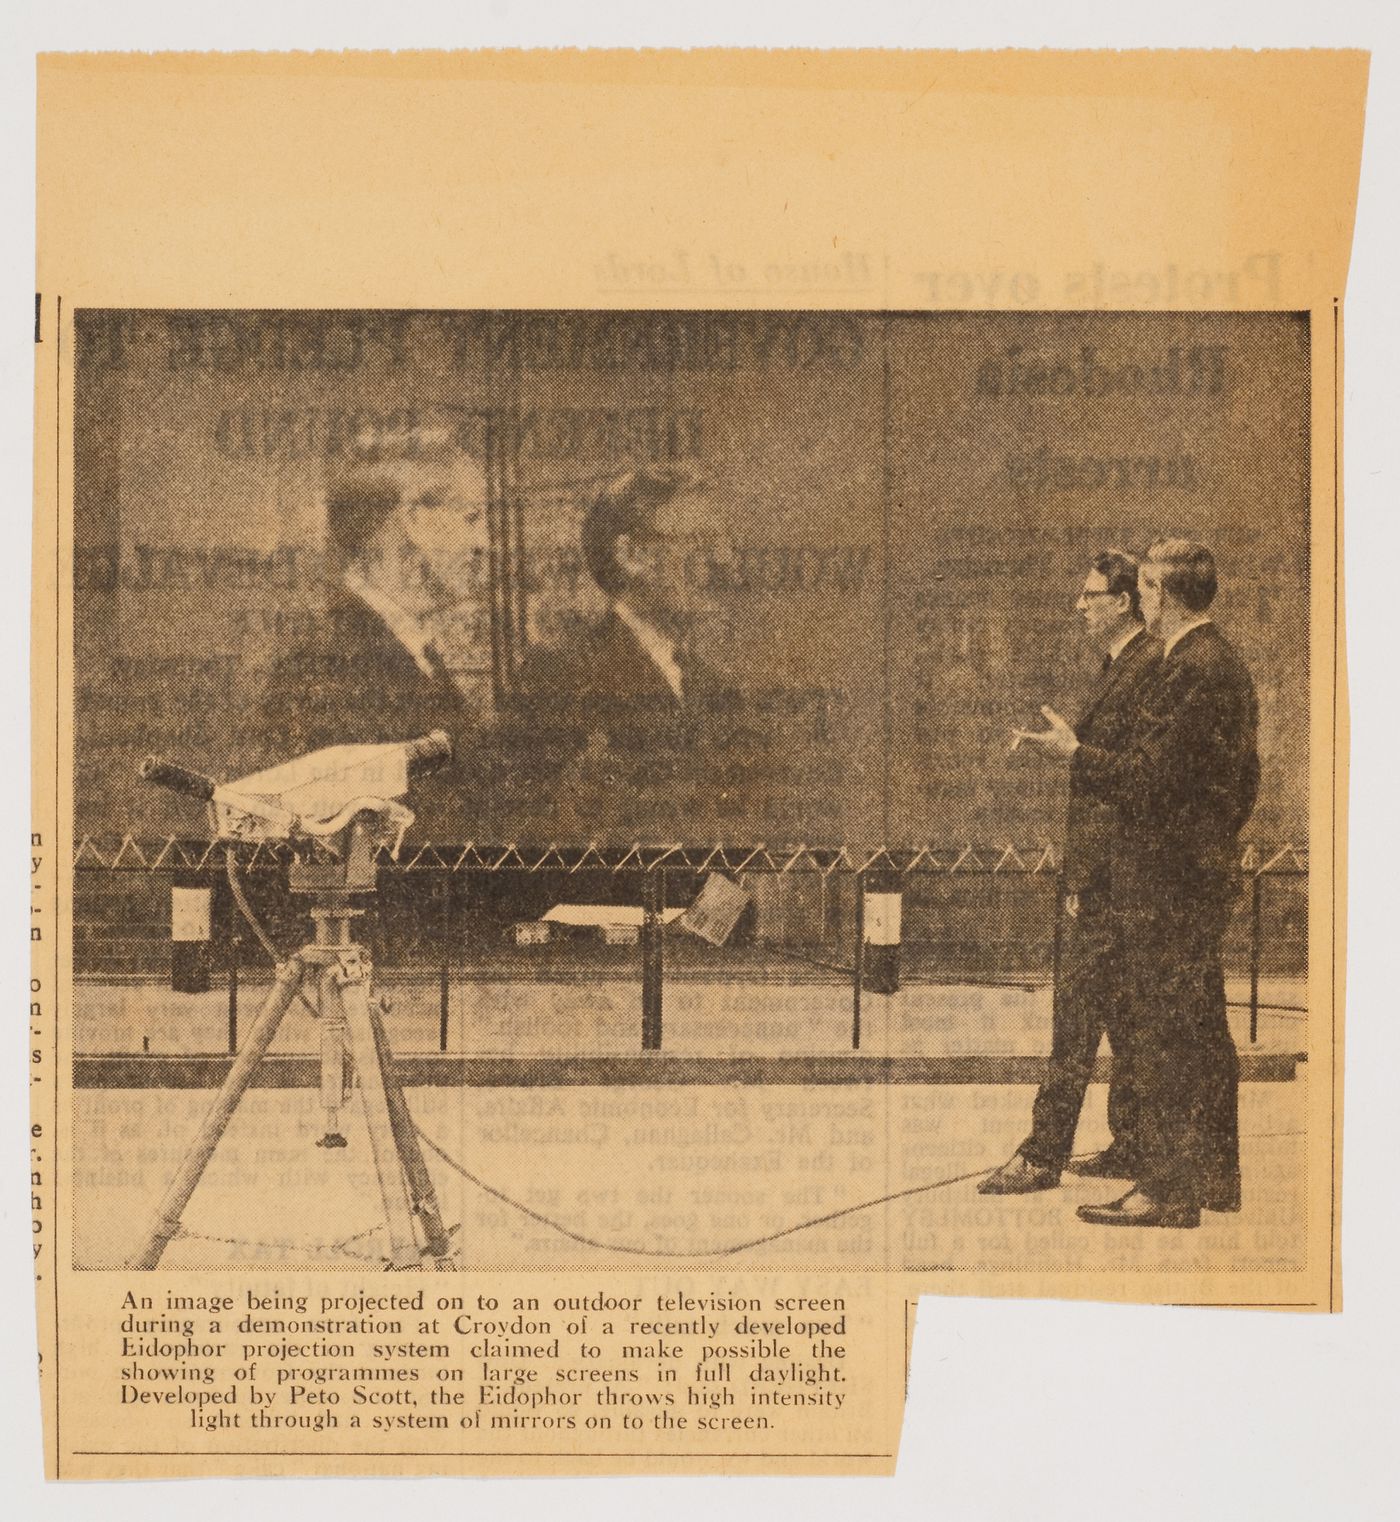 Newspaper clipping about the Eidophor Projection System from unknown newspaper